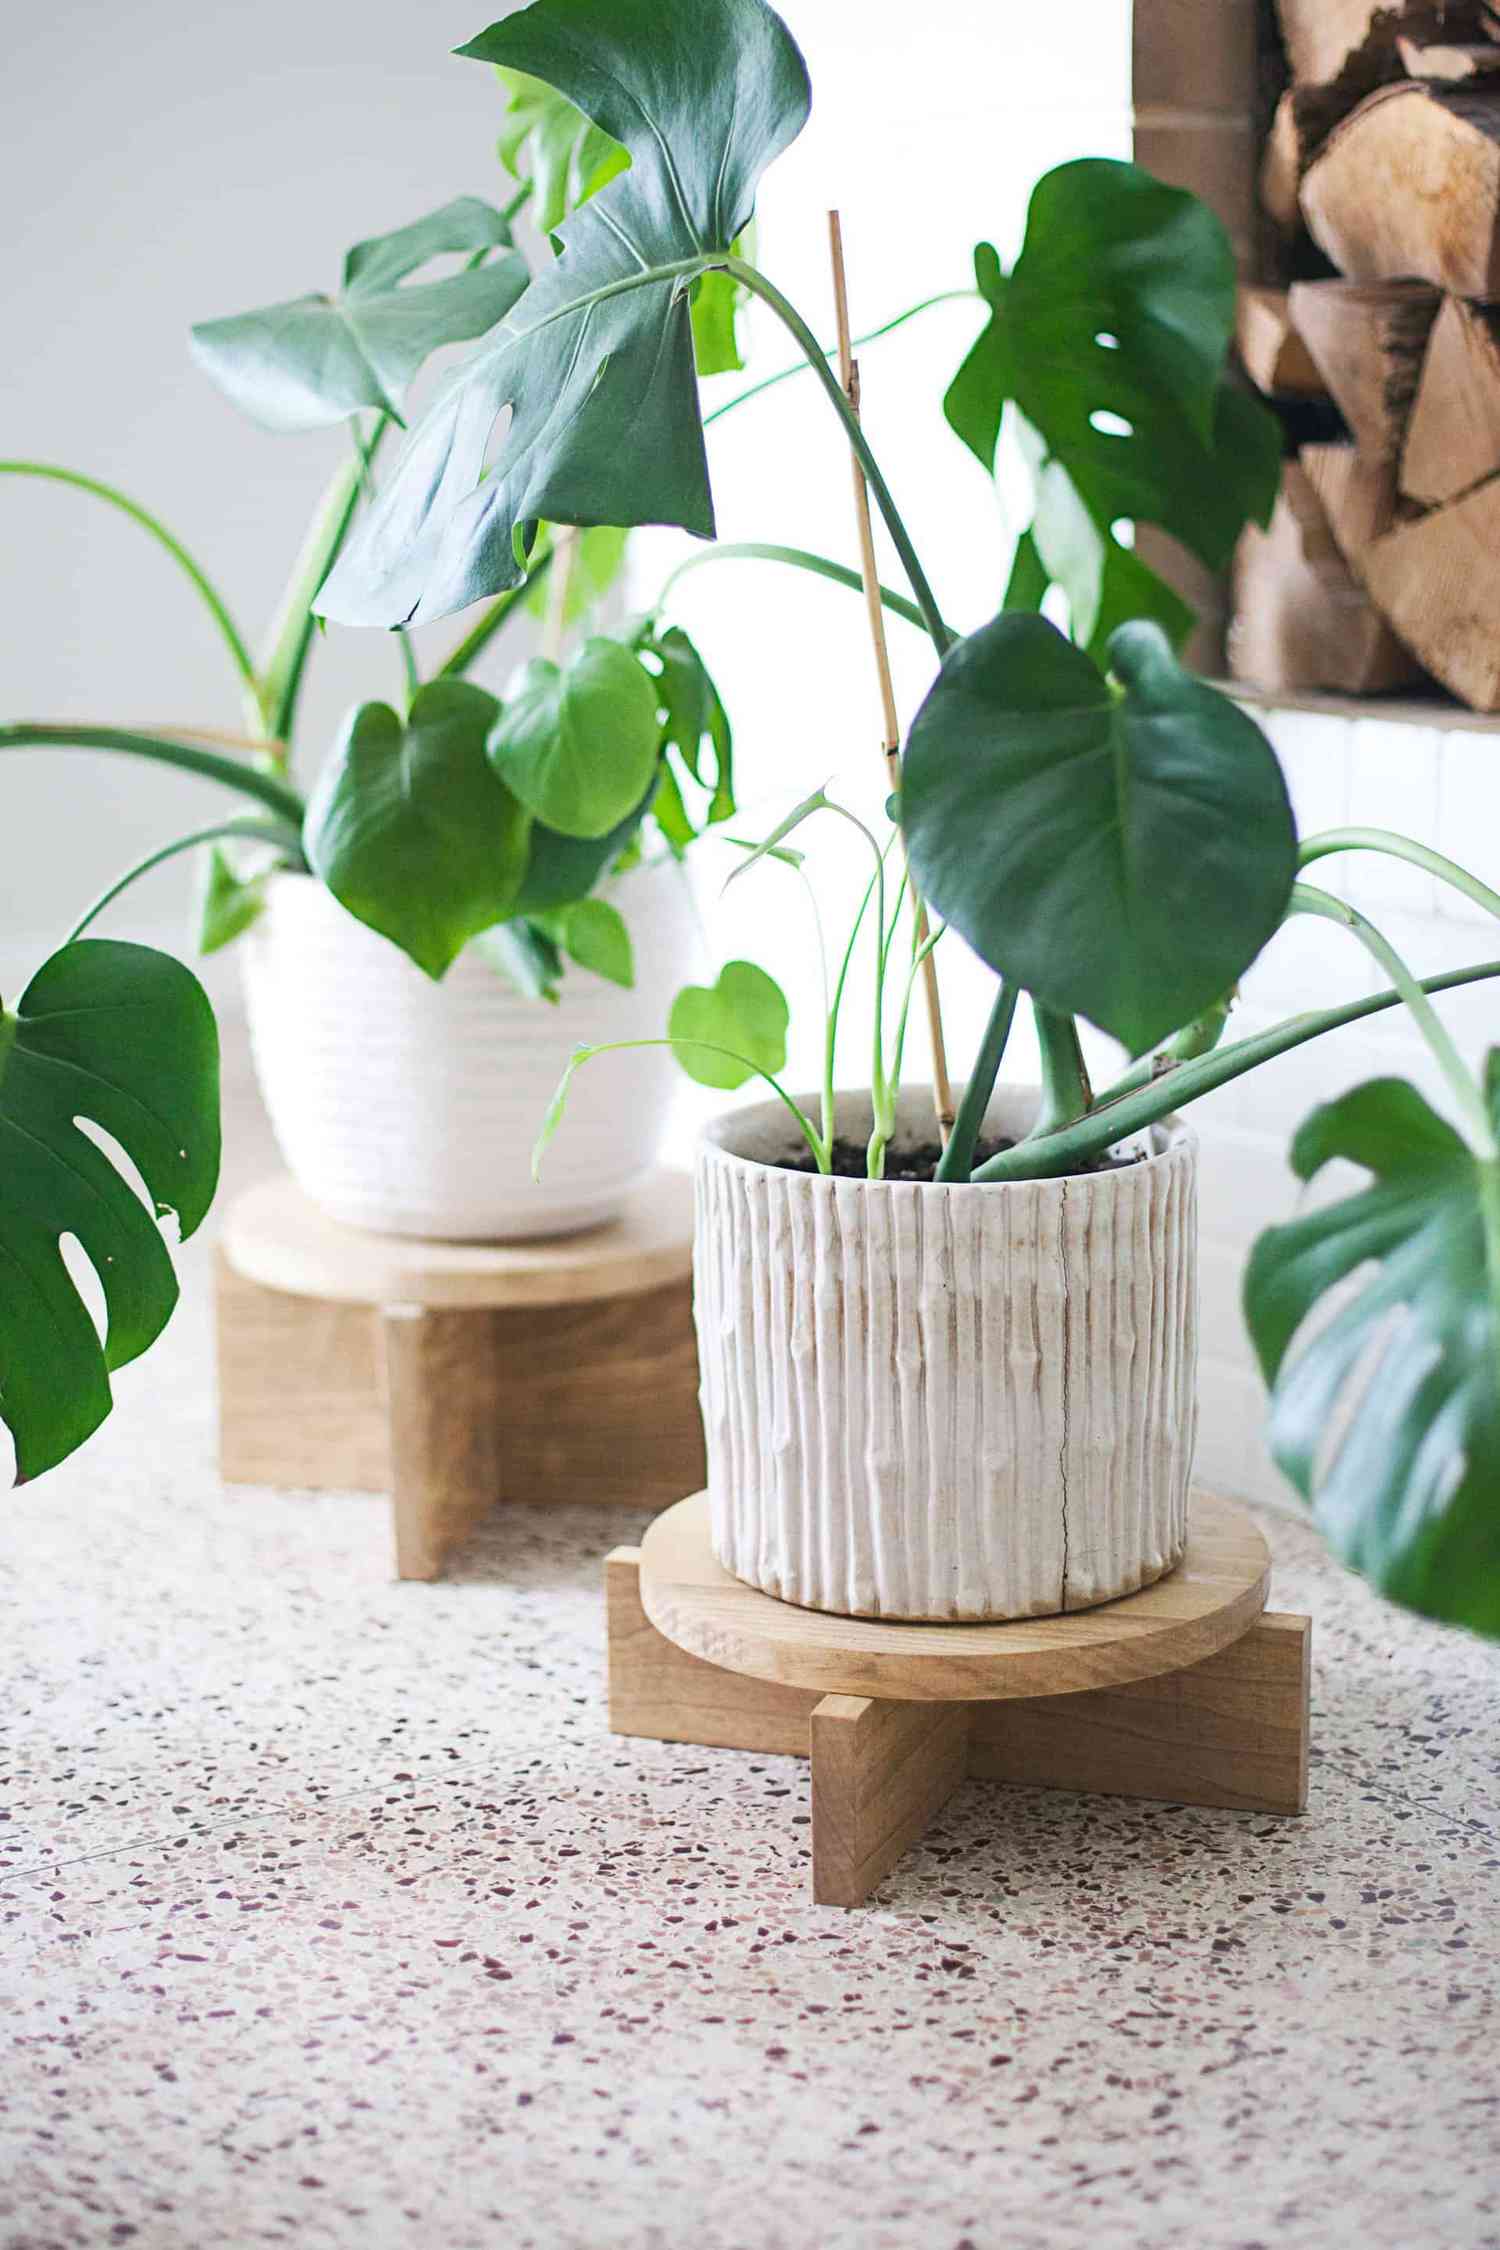 Short wood plant stands holding monsteras.